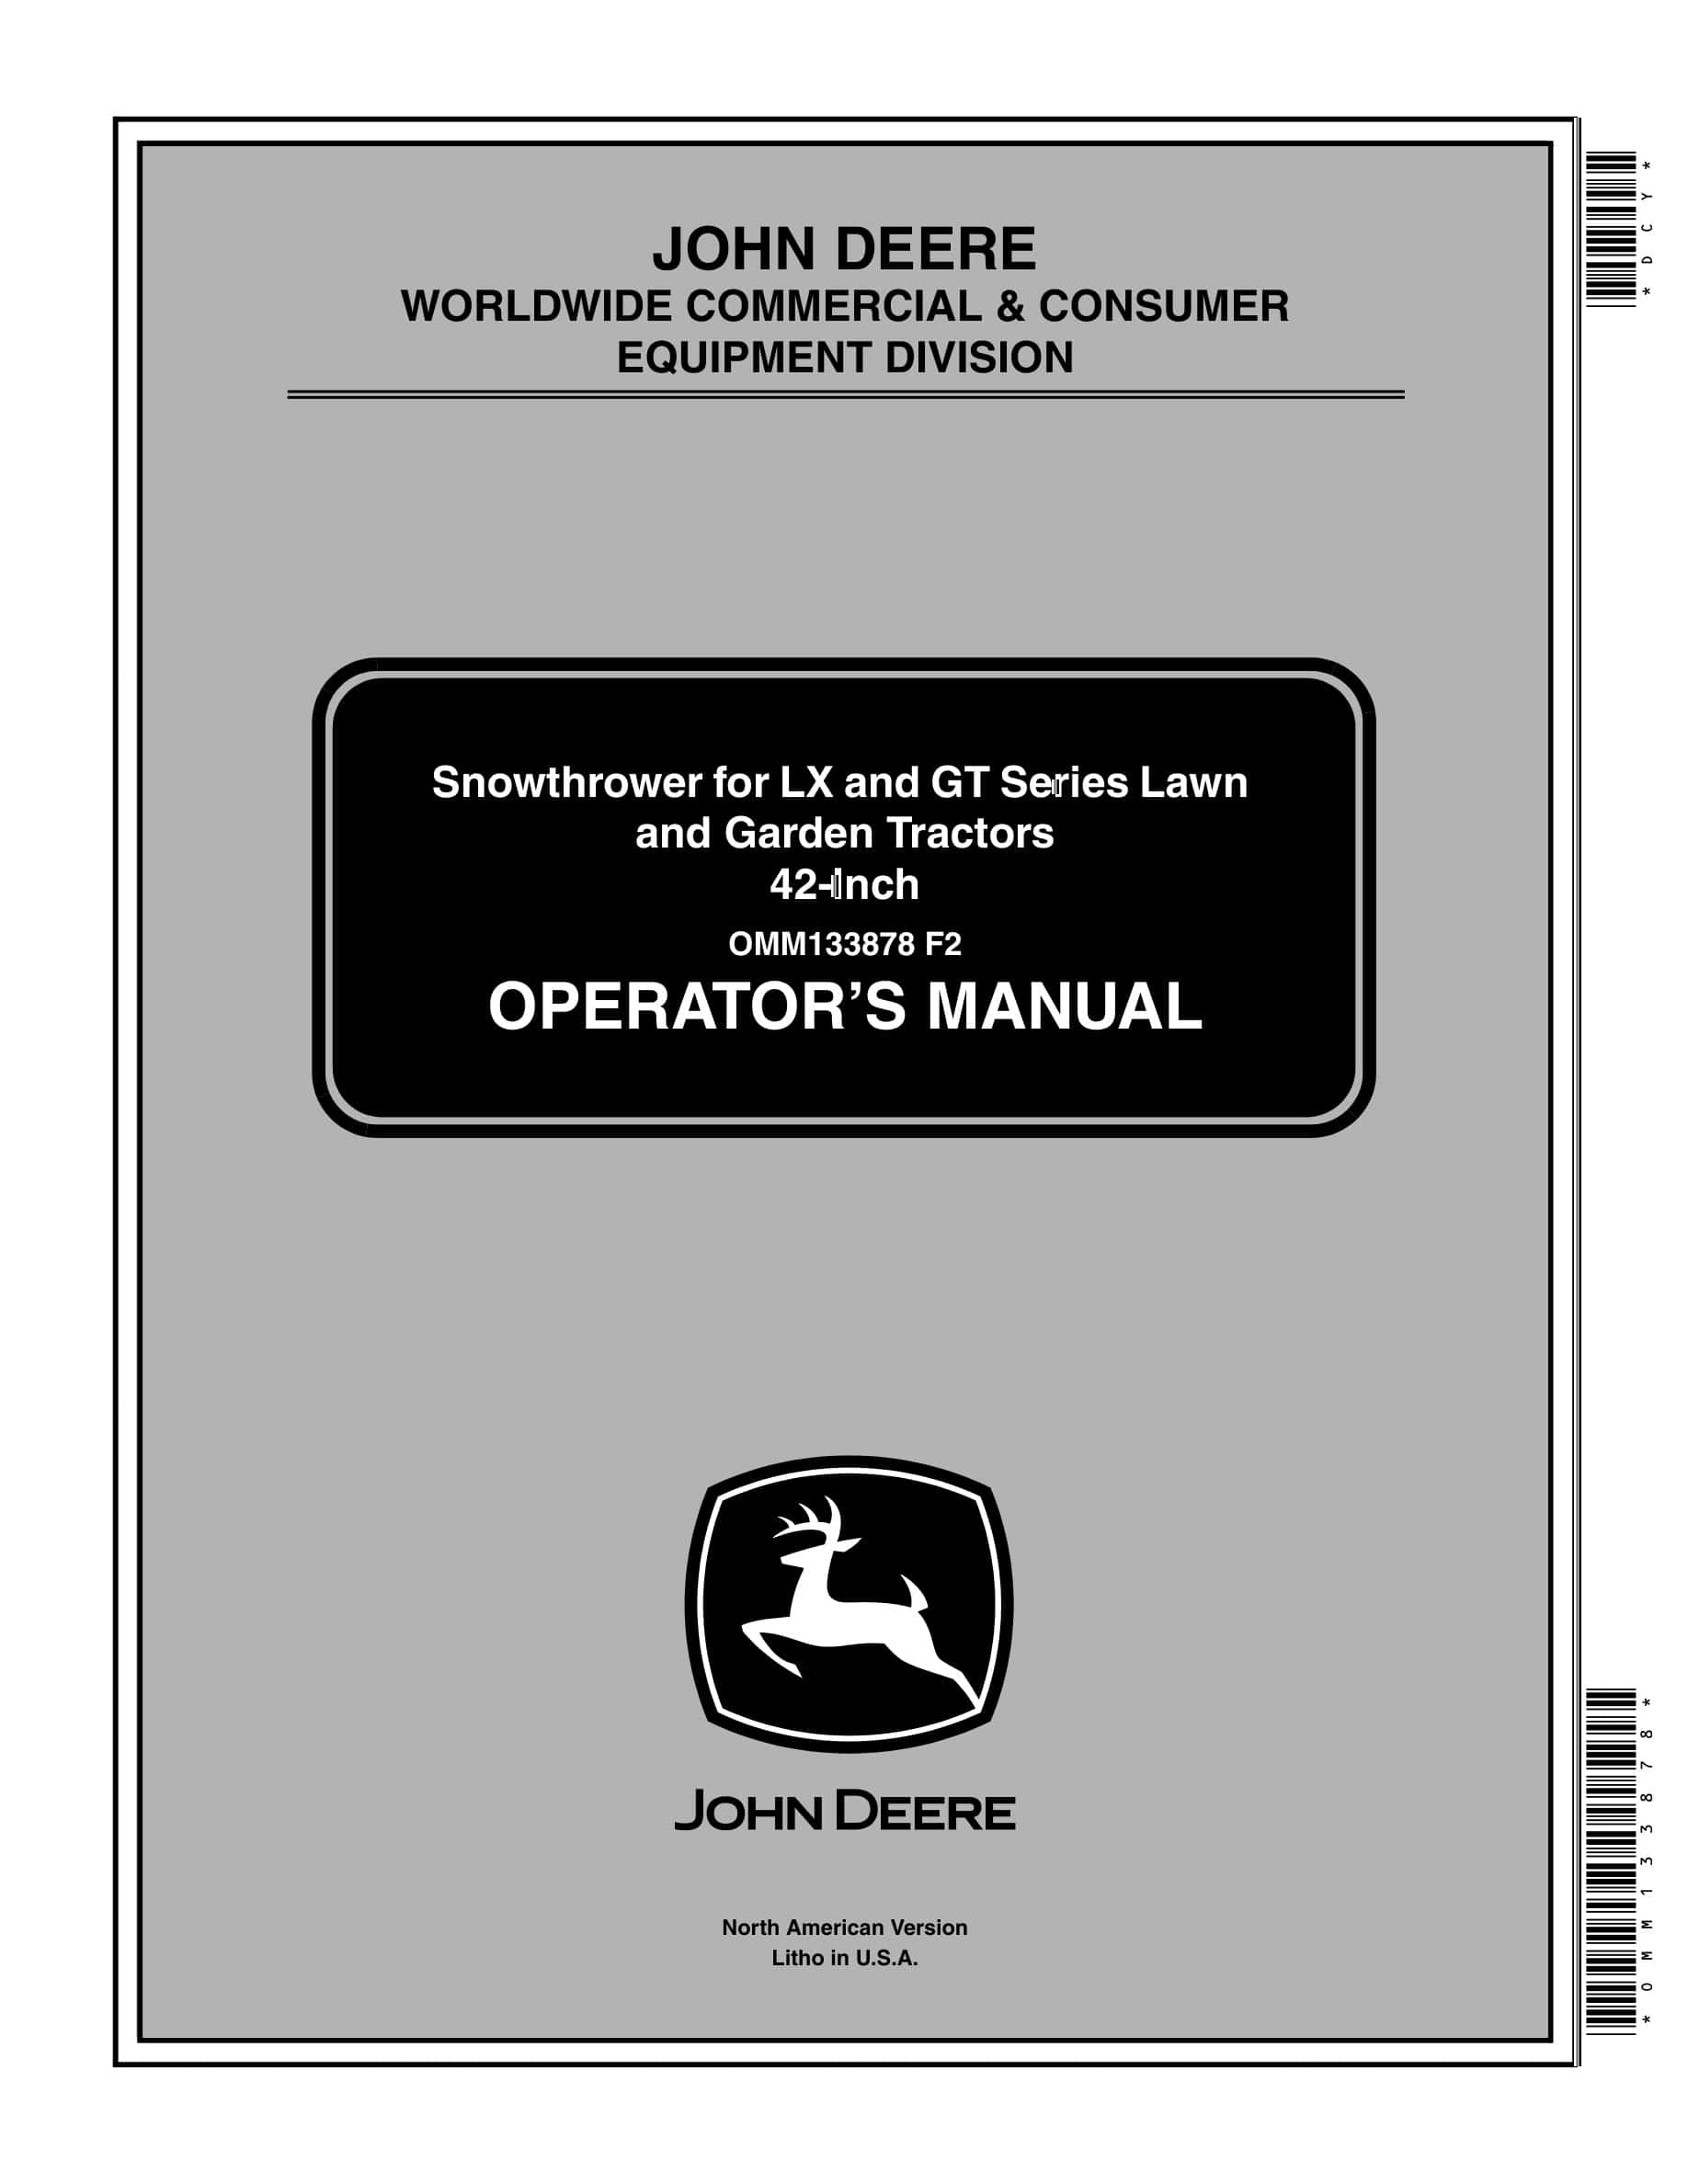 John Deere Snowthrower For Lx And Gt Series Lawn And 42 Operator Manuals OMM133878-1